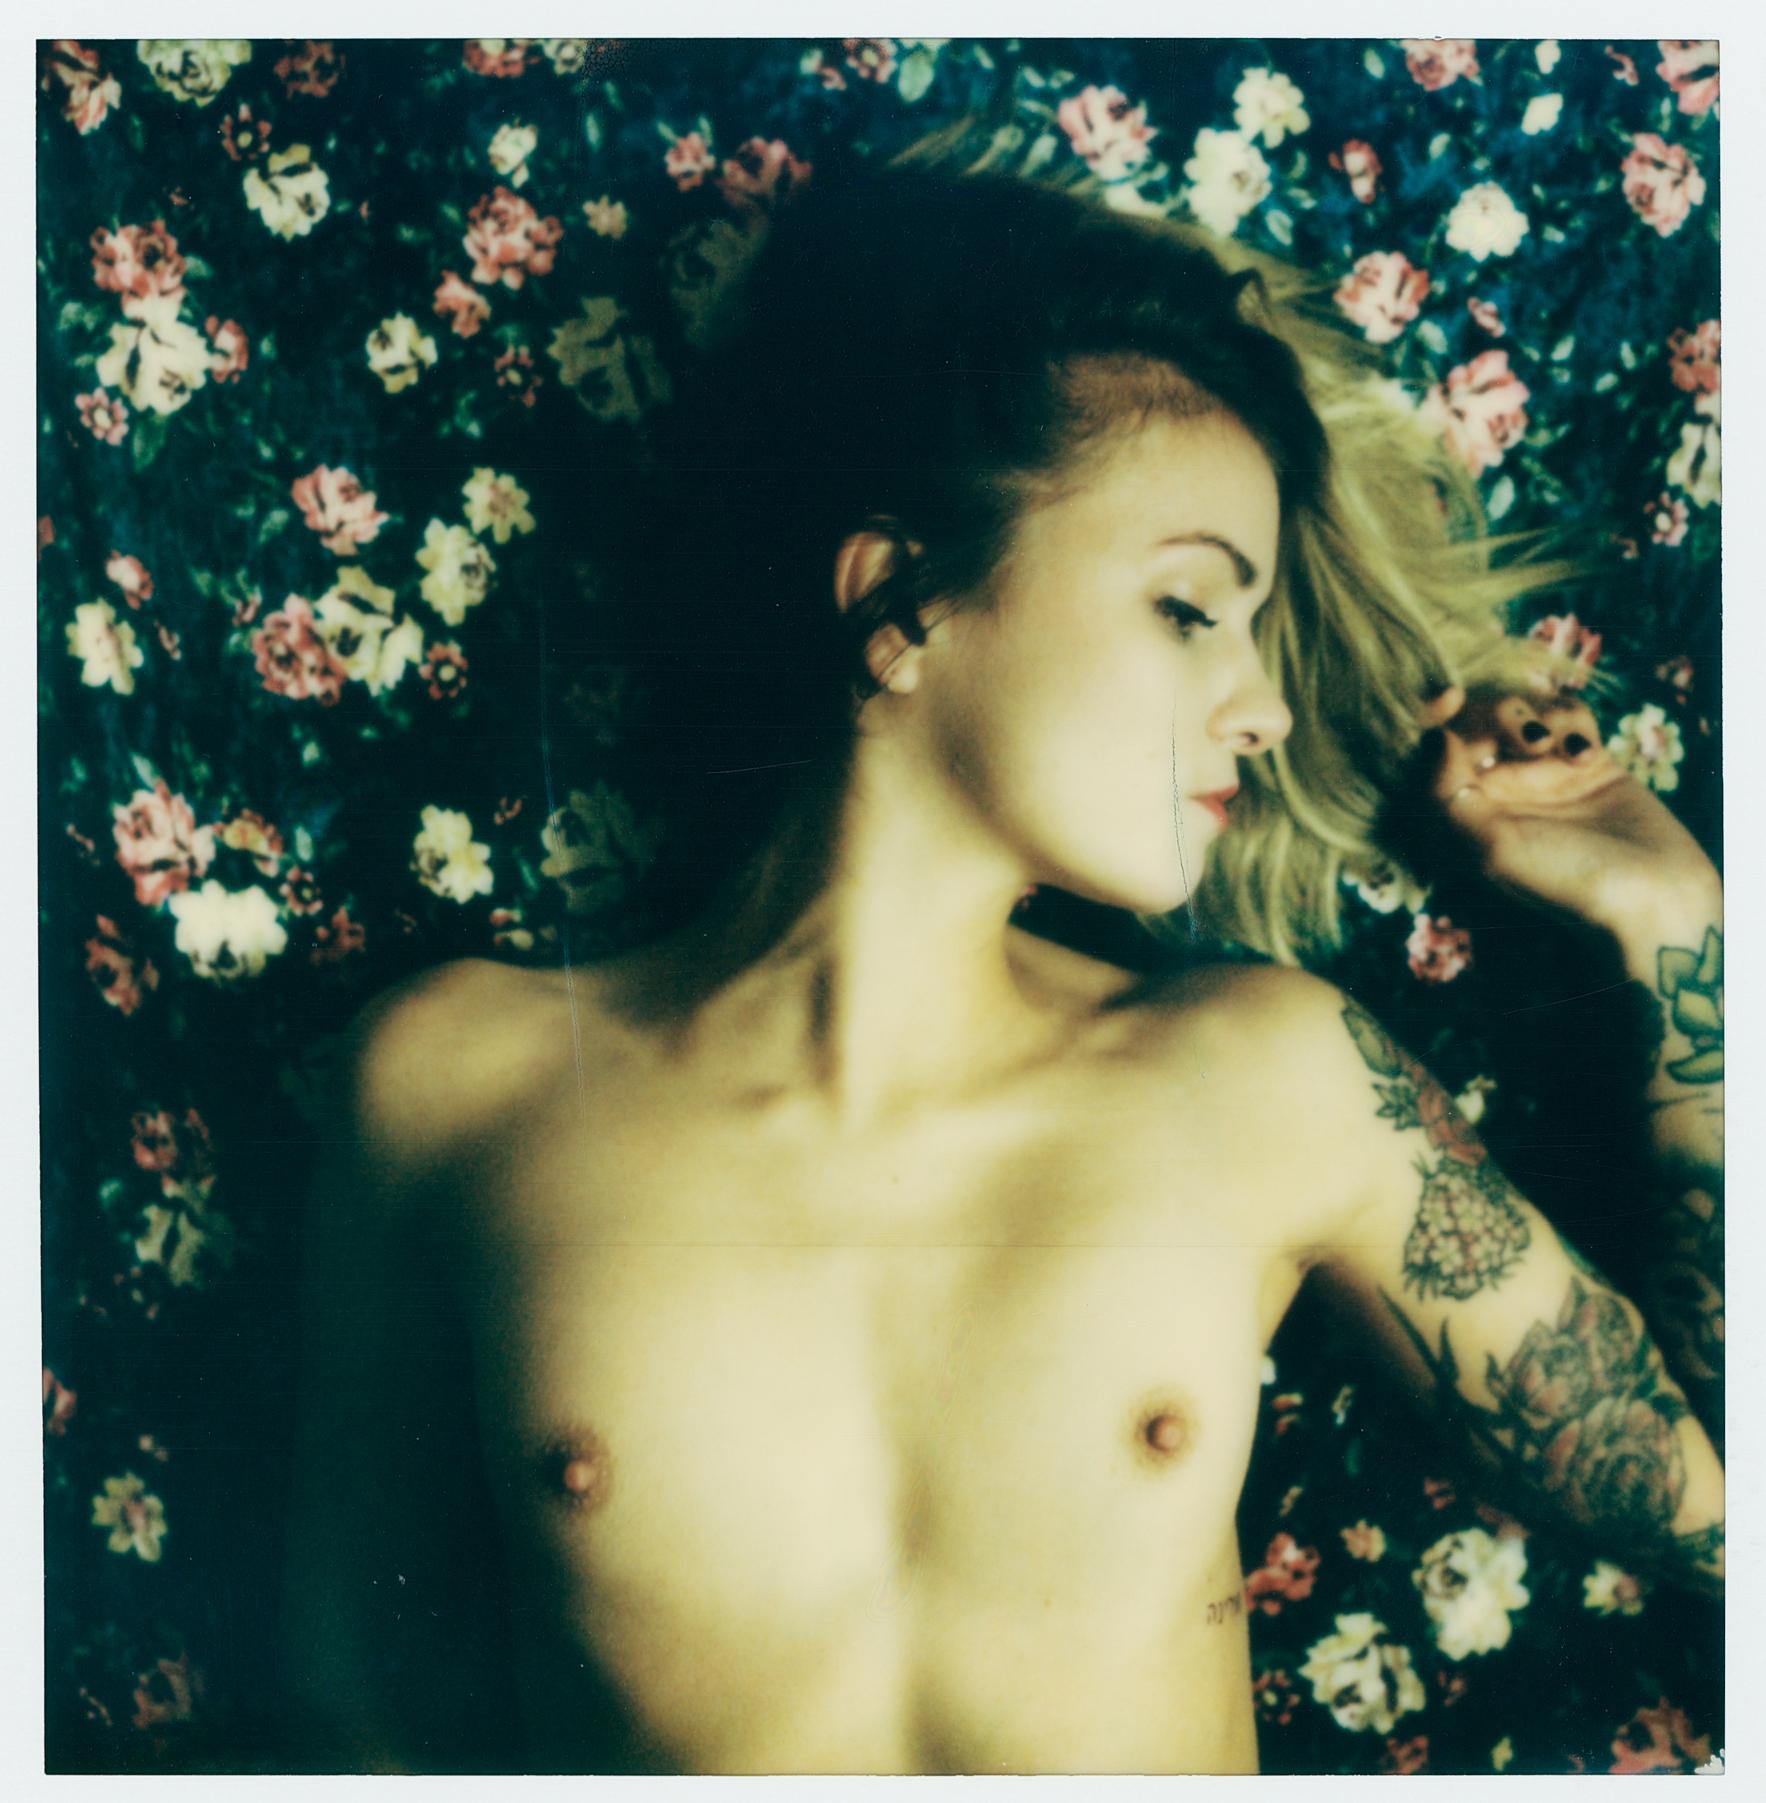 Ariel Shelleg Color Photograph - CLOSING TIME SESSIONS - 21st Century, Contemporary, Polaroid, Nude